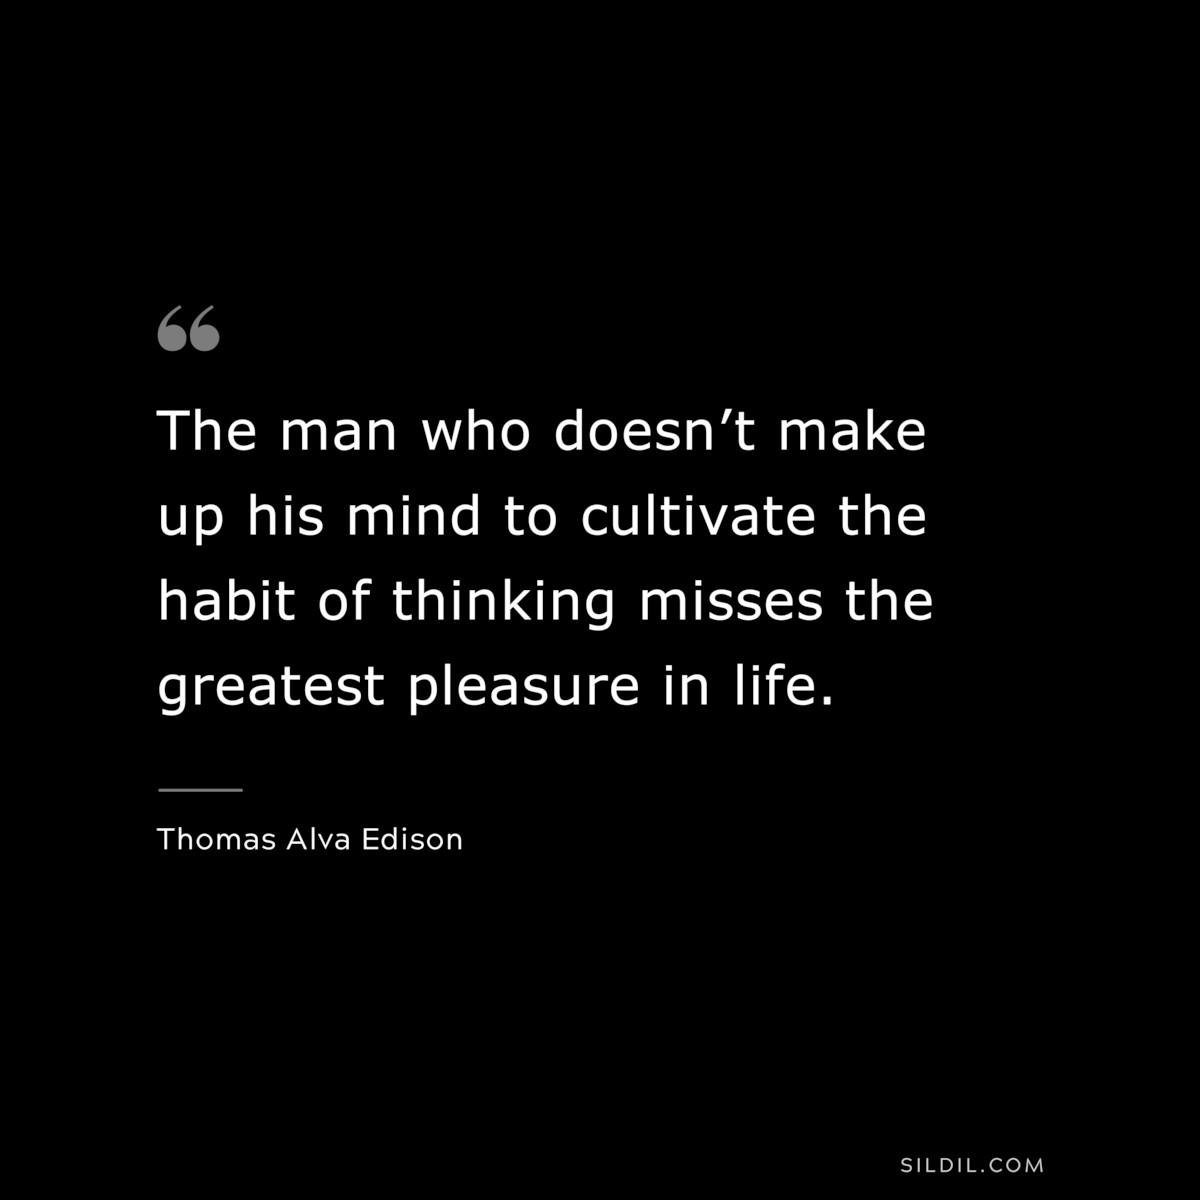 The man who doesn’t make up his mind to cultivate the habit of thinking misses the greatest pleasure in life. ― Thomas Alva Edison